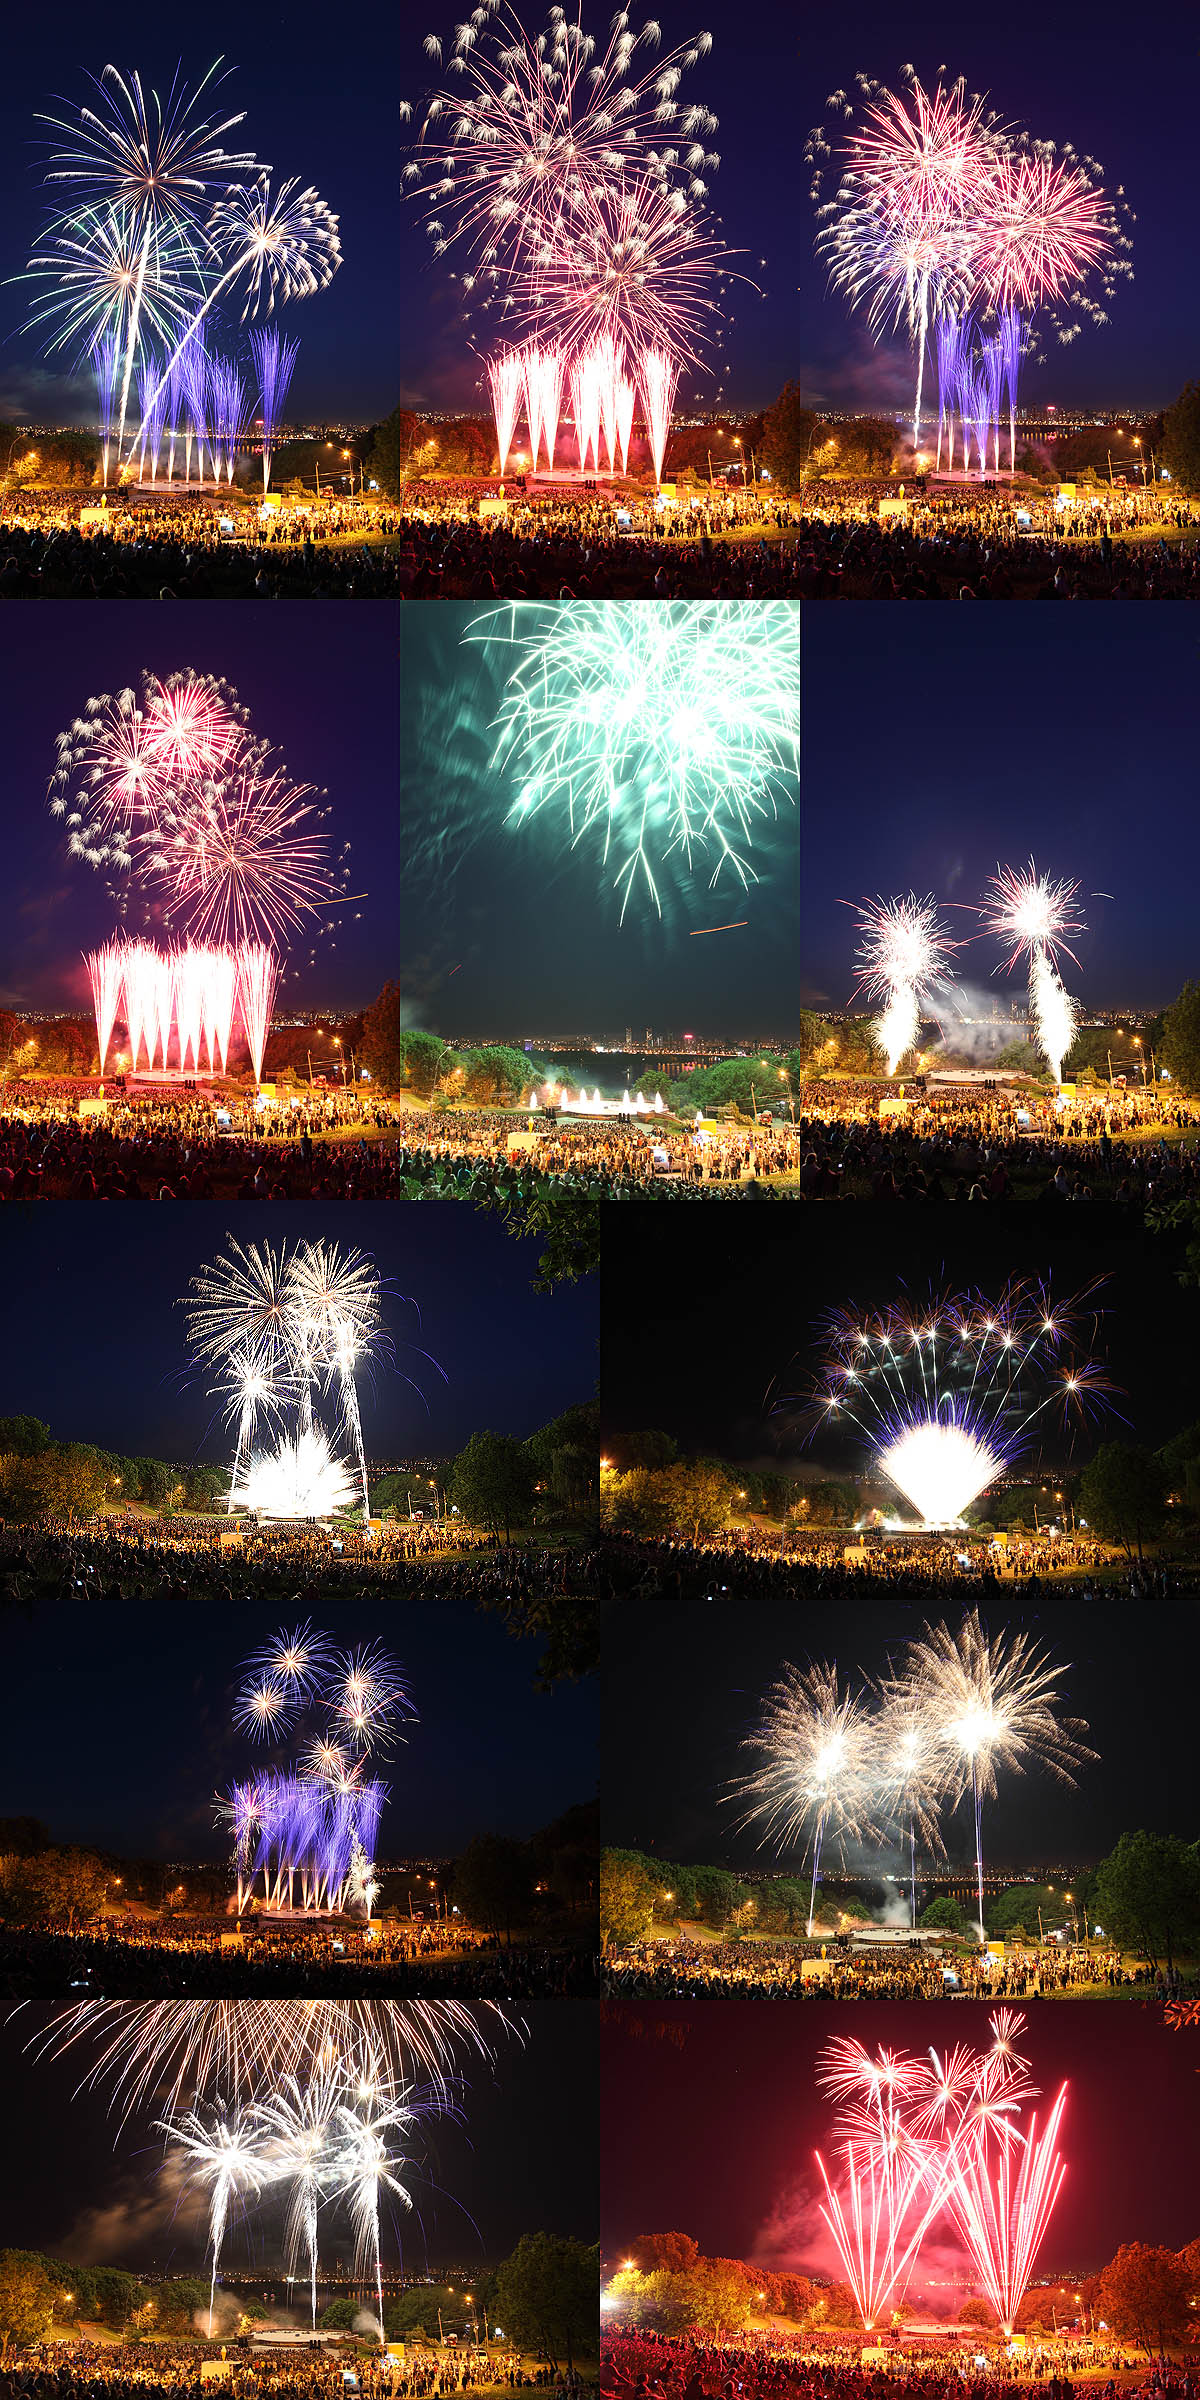  Firework Show, May 12, 2012